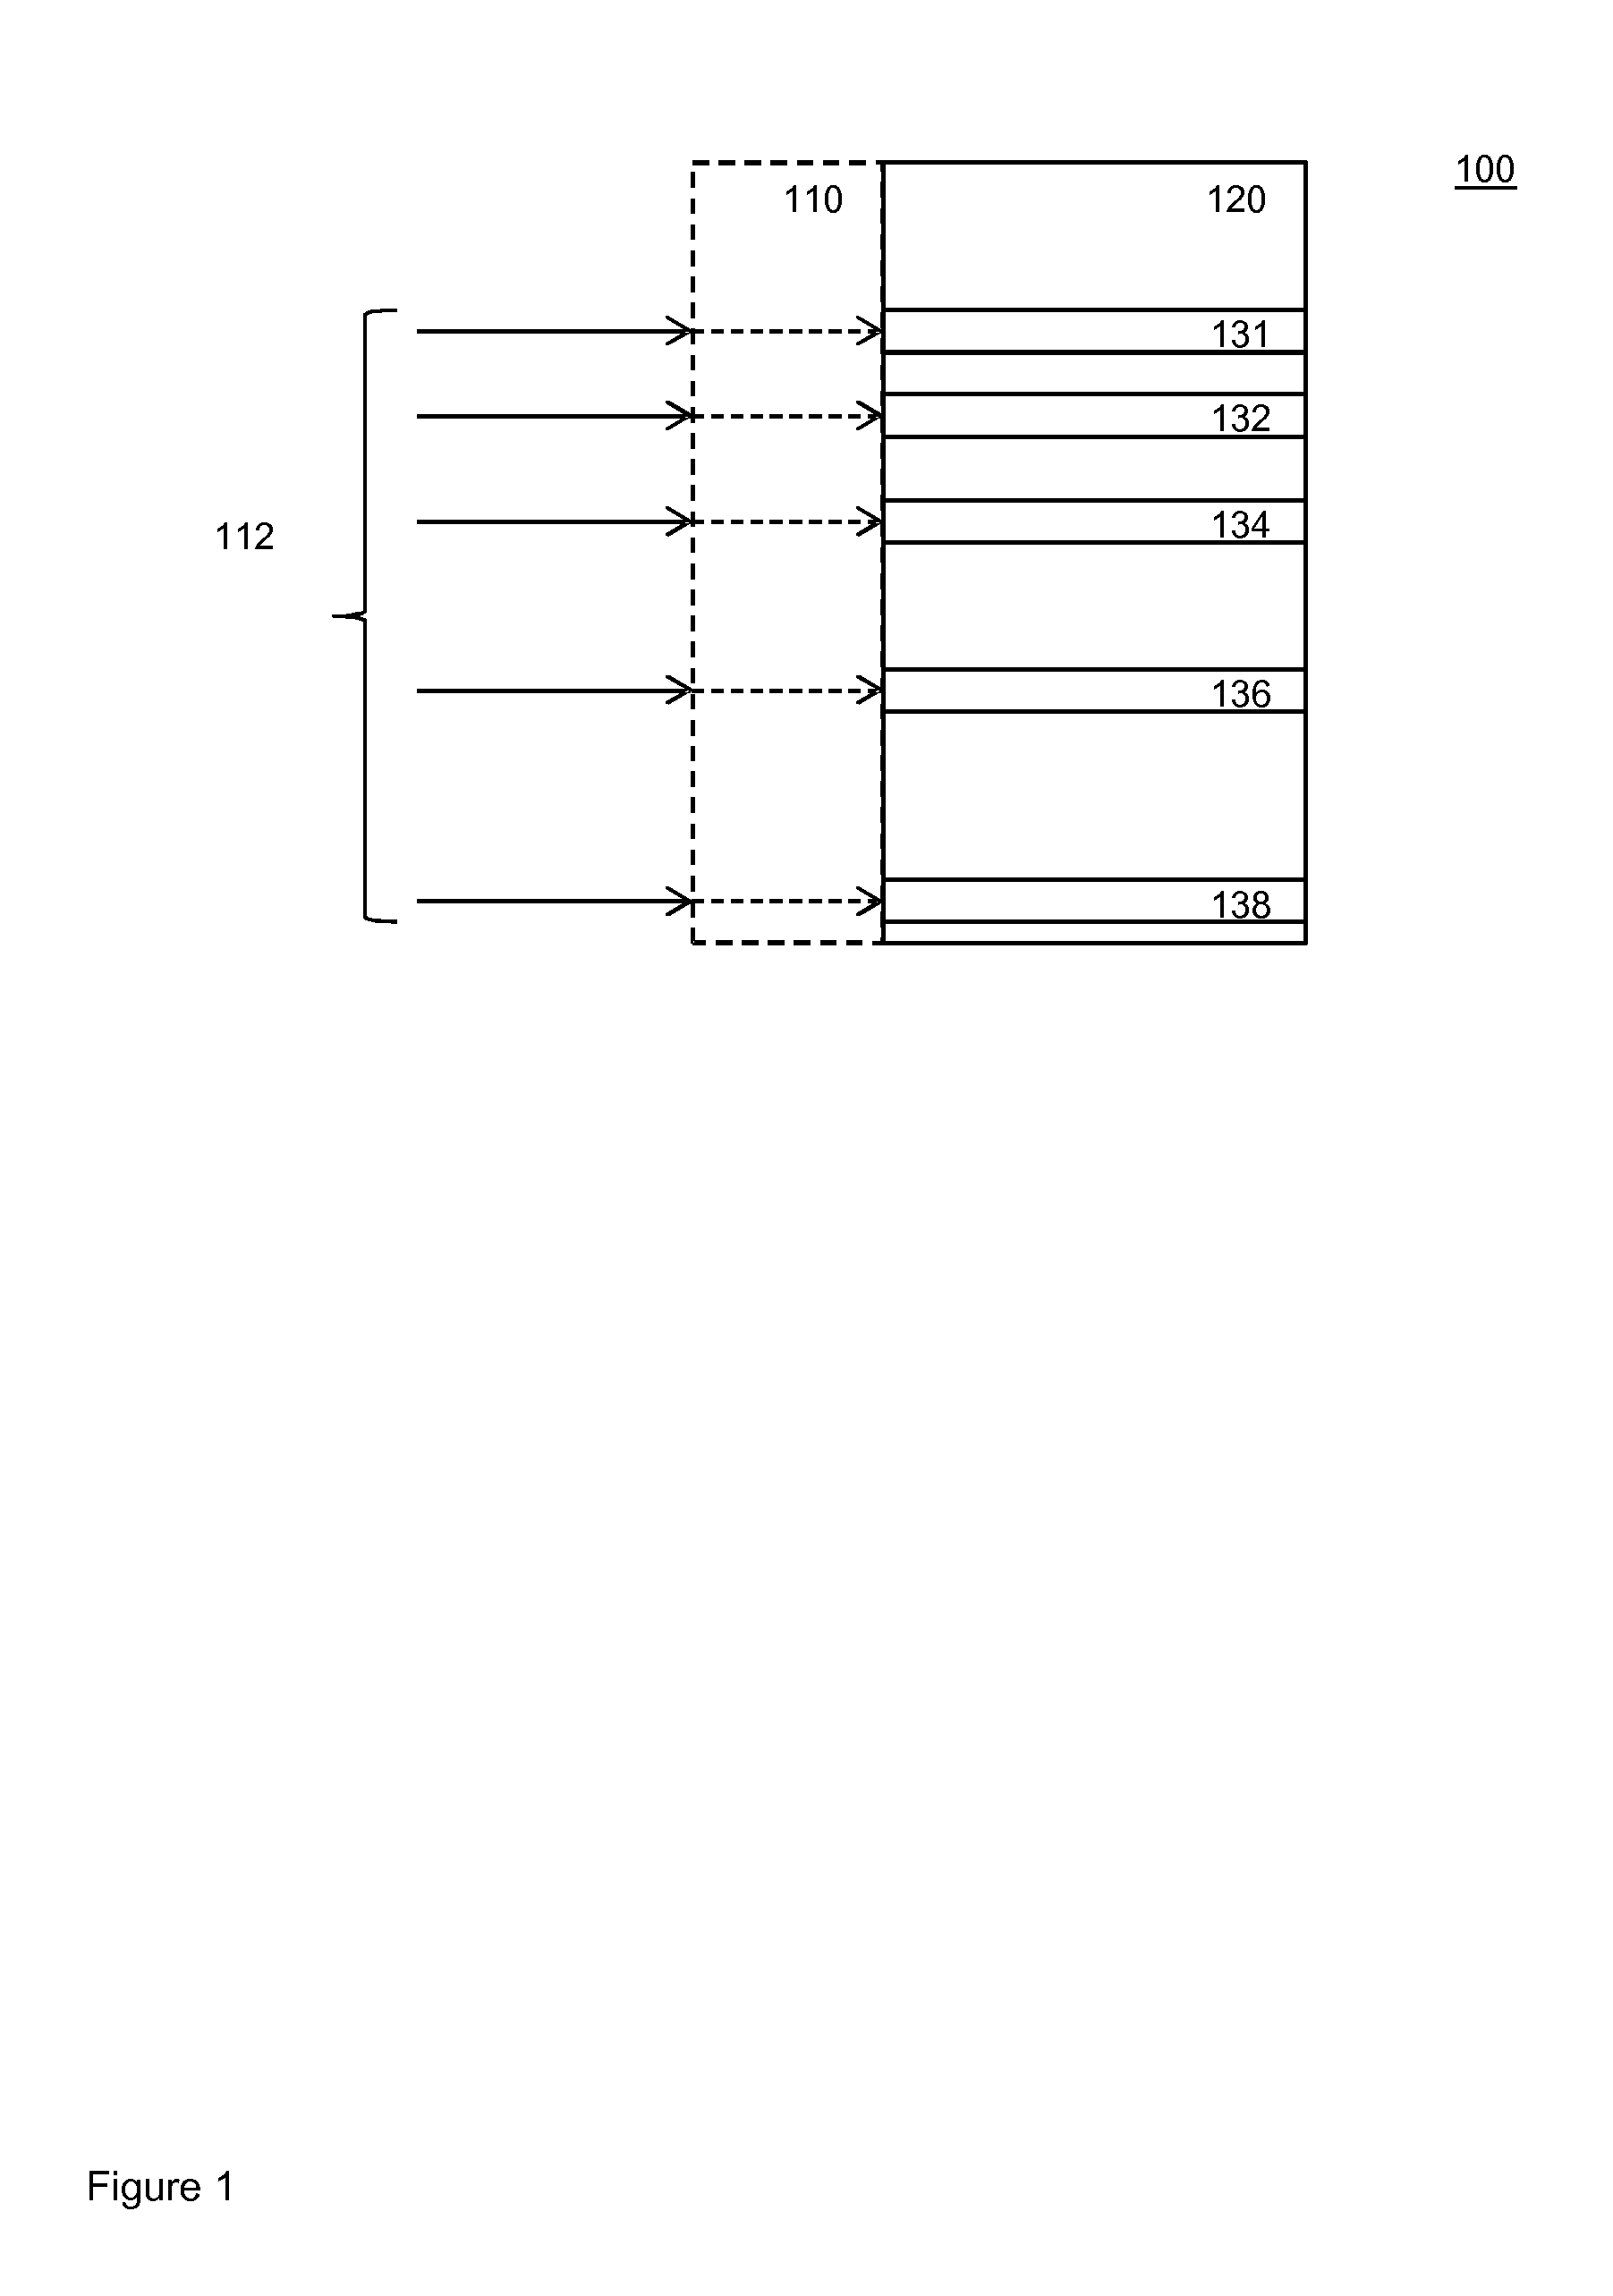 Computing device storing look-up tables for computation of a function